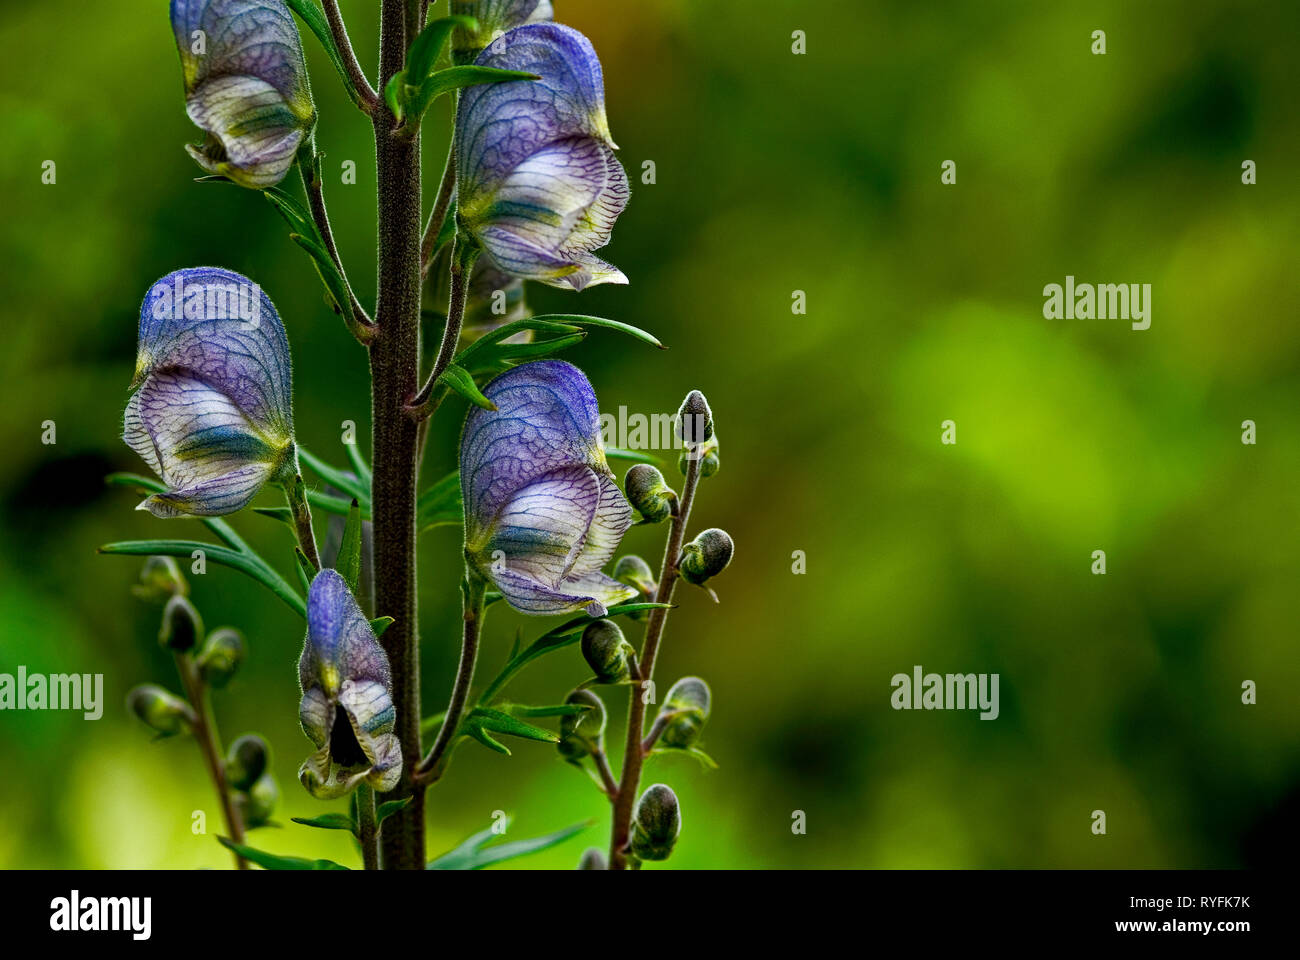 Aconitum, Monkshood flowers on stem, close-up with blurred green background Stock Photo